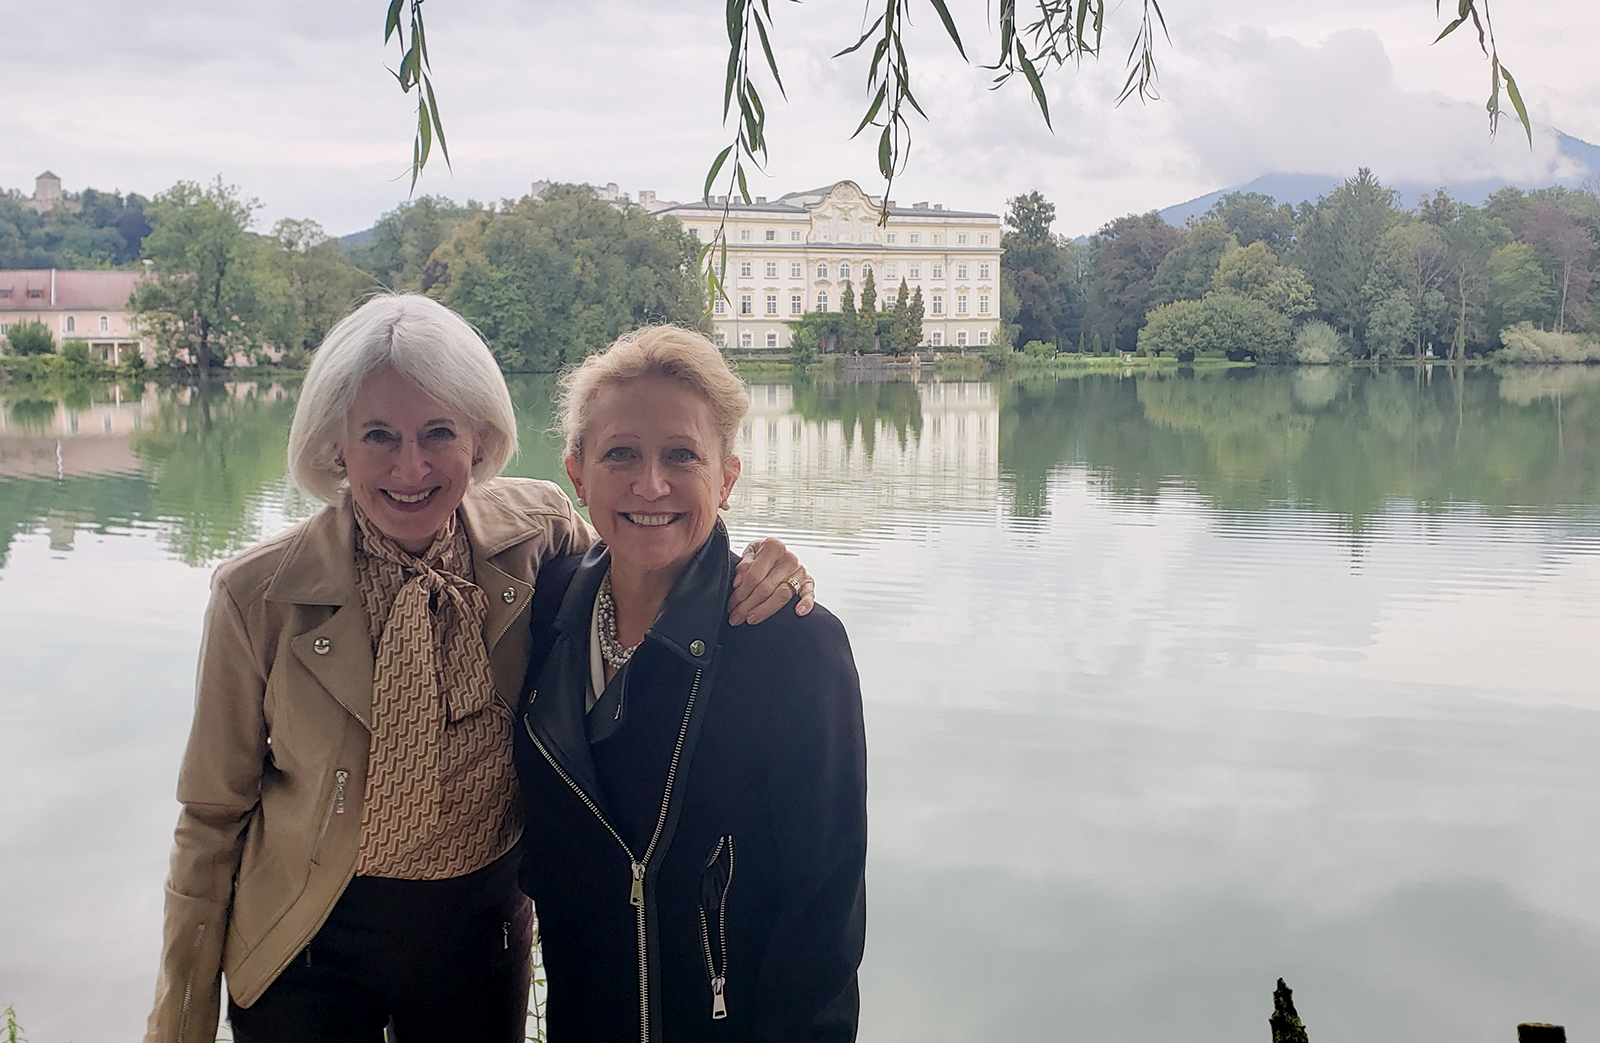 Karen Wolk Feinstein stands to the left of Lisa Simpson in Salzburg, Austria, 2019. Karen wears a tan moto jacket and tan top with tan scarf, and has short white hair. Lisa has long blonde hair tied back and wears a black moto jacket. In the background is a body of water and a white building on the opposite shore. The sky is cloudy.